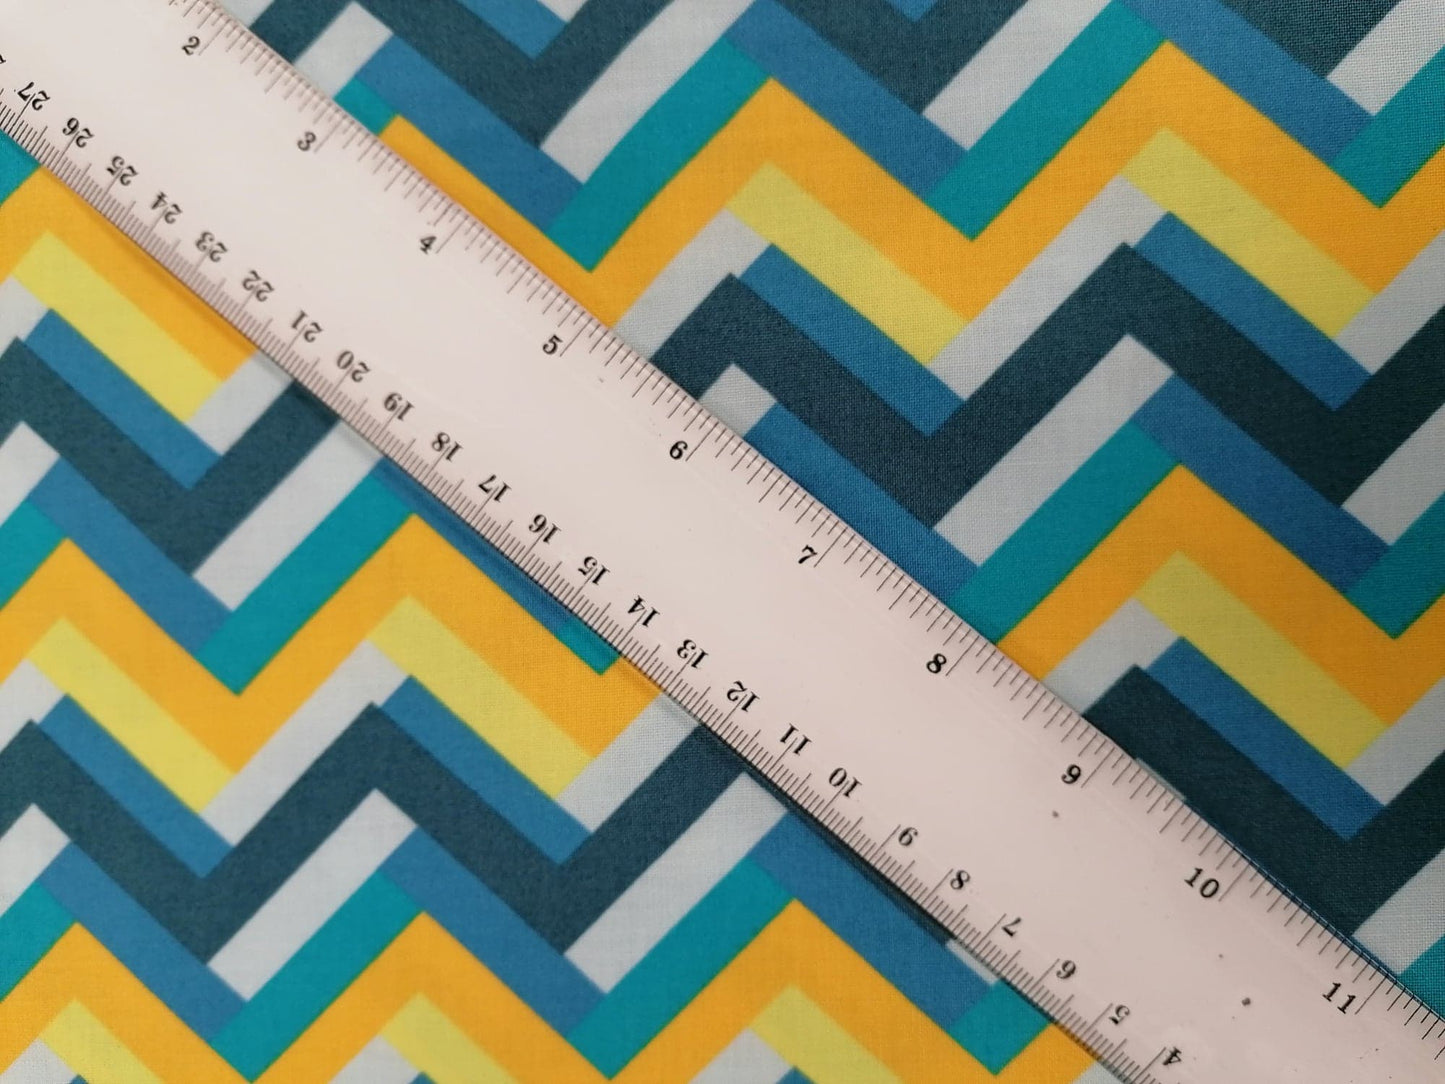 100% Cotton - Crafting & Quilting - Zig Zag - Blue/Yellow - 44" Wide - Sold By the Meter